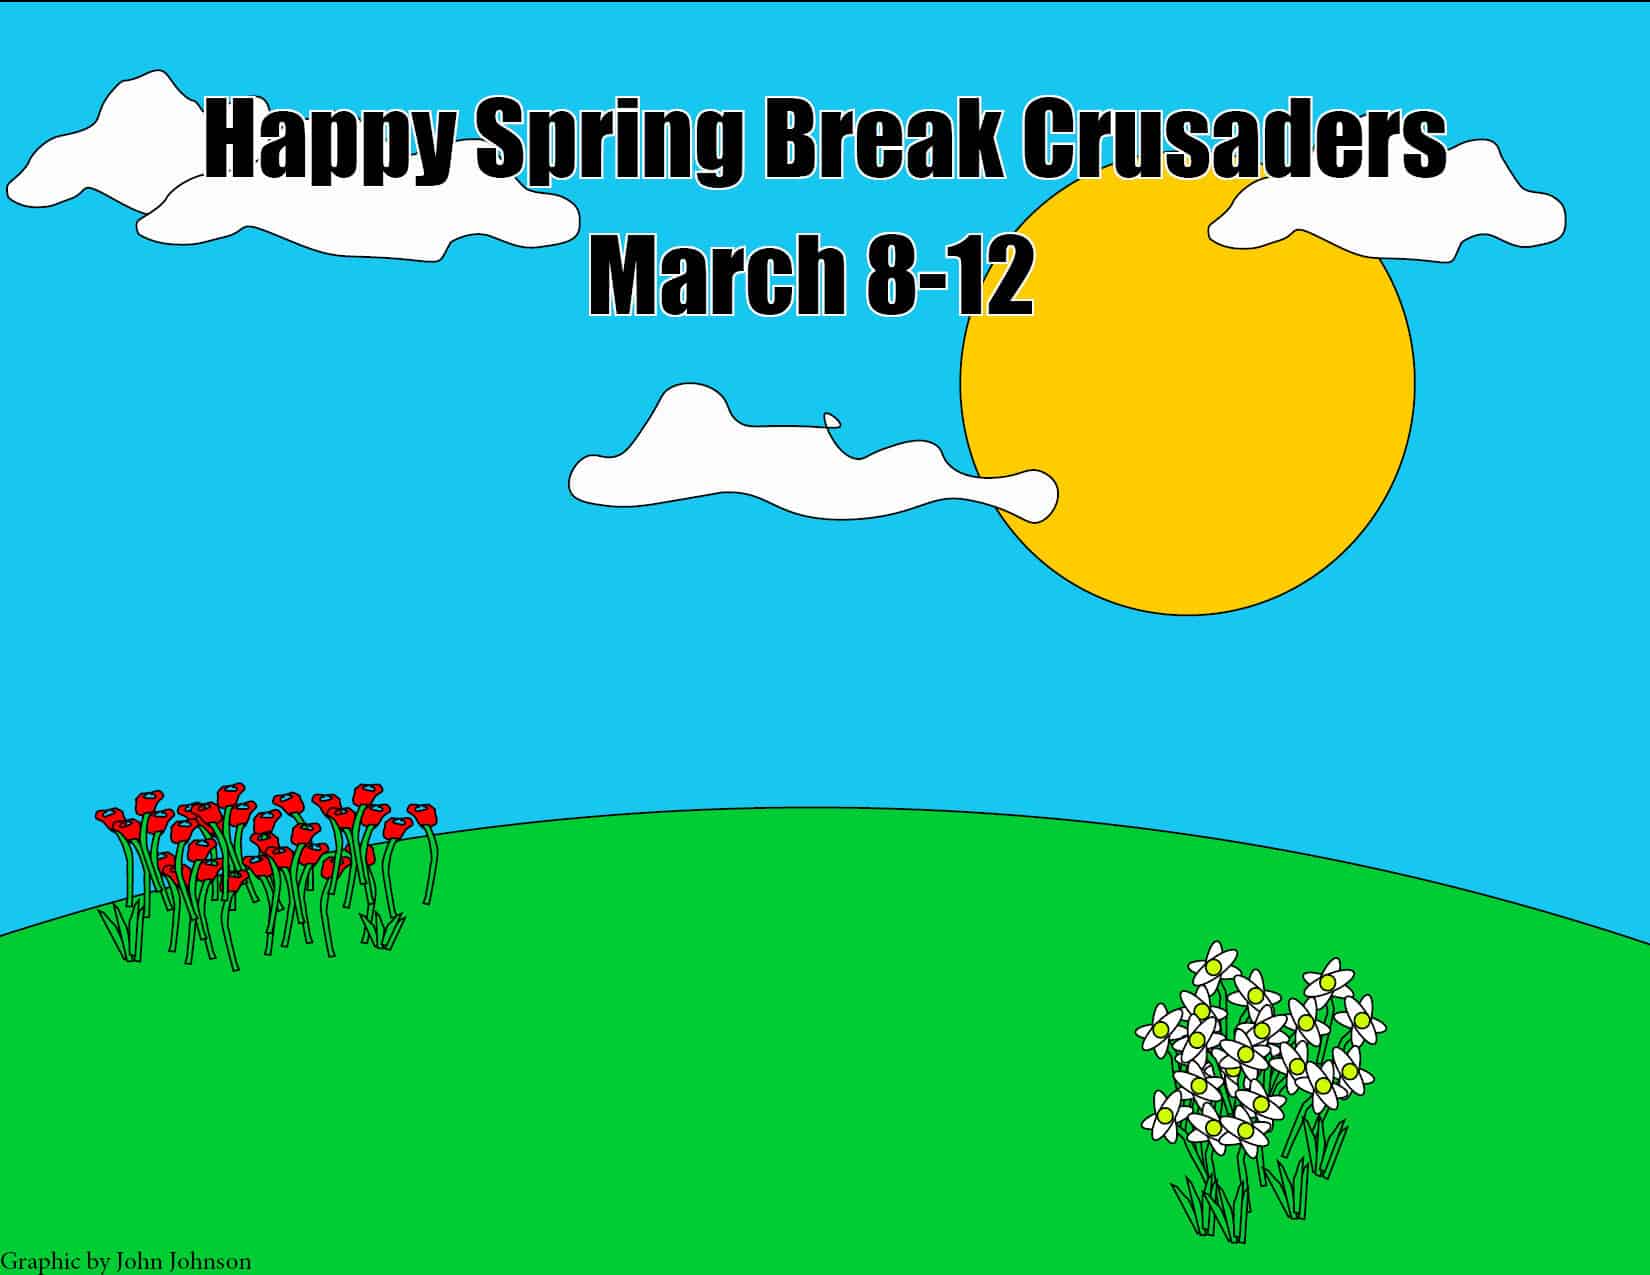 Spring break is right around the corner Crusaders. Mark your calendars for March 8-12, 2021.